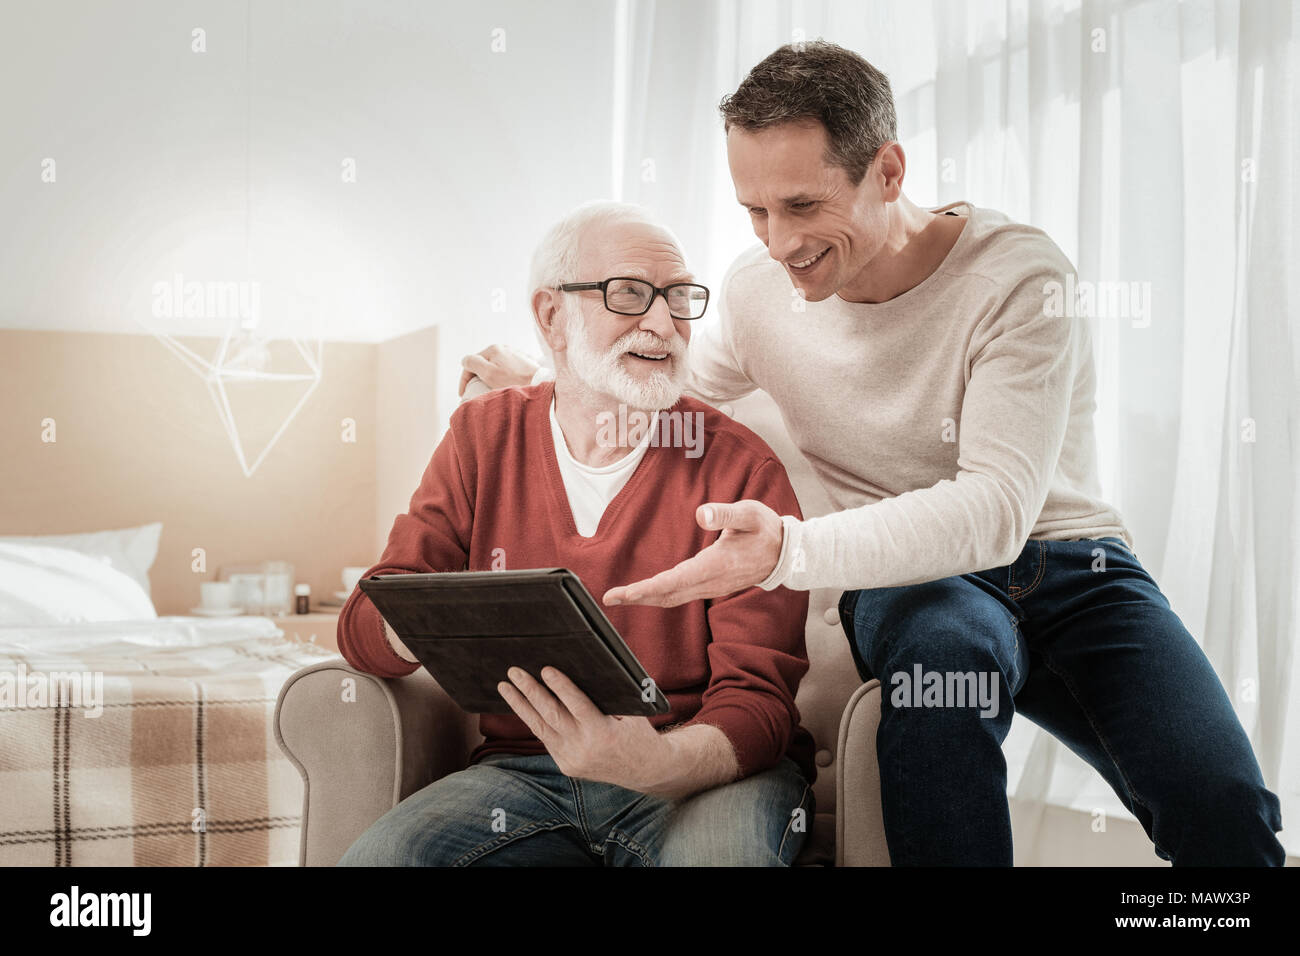 Funny pleasant men sitting and overlooking the tablet. Stock Photo